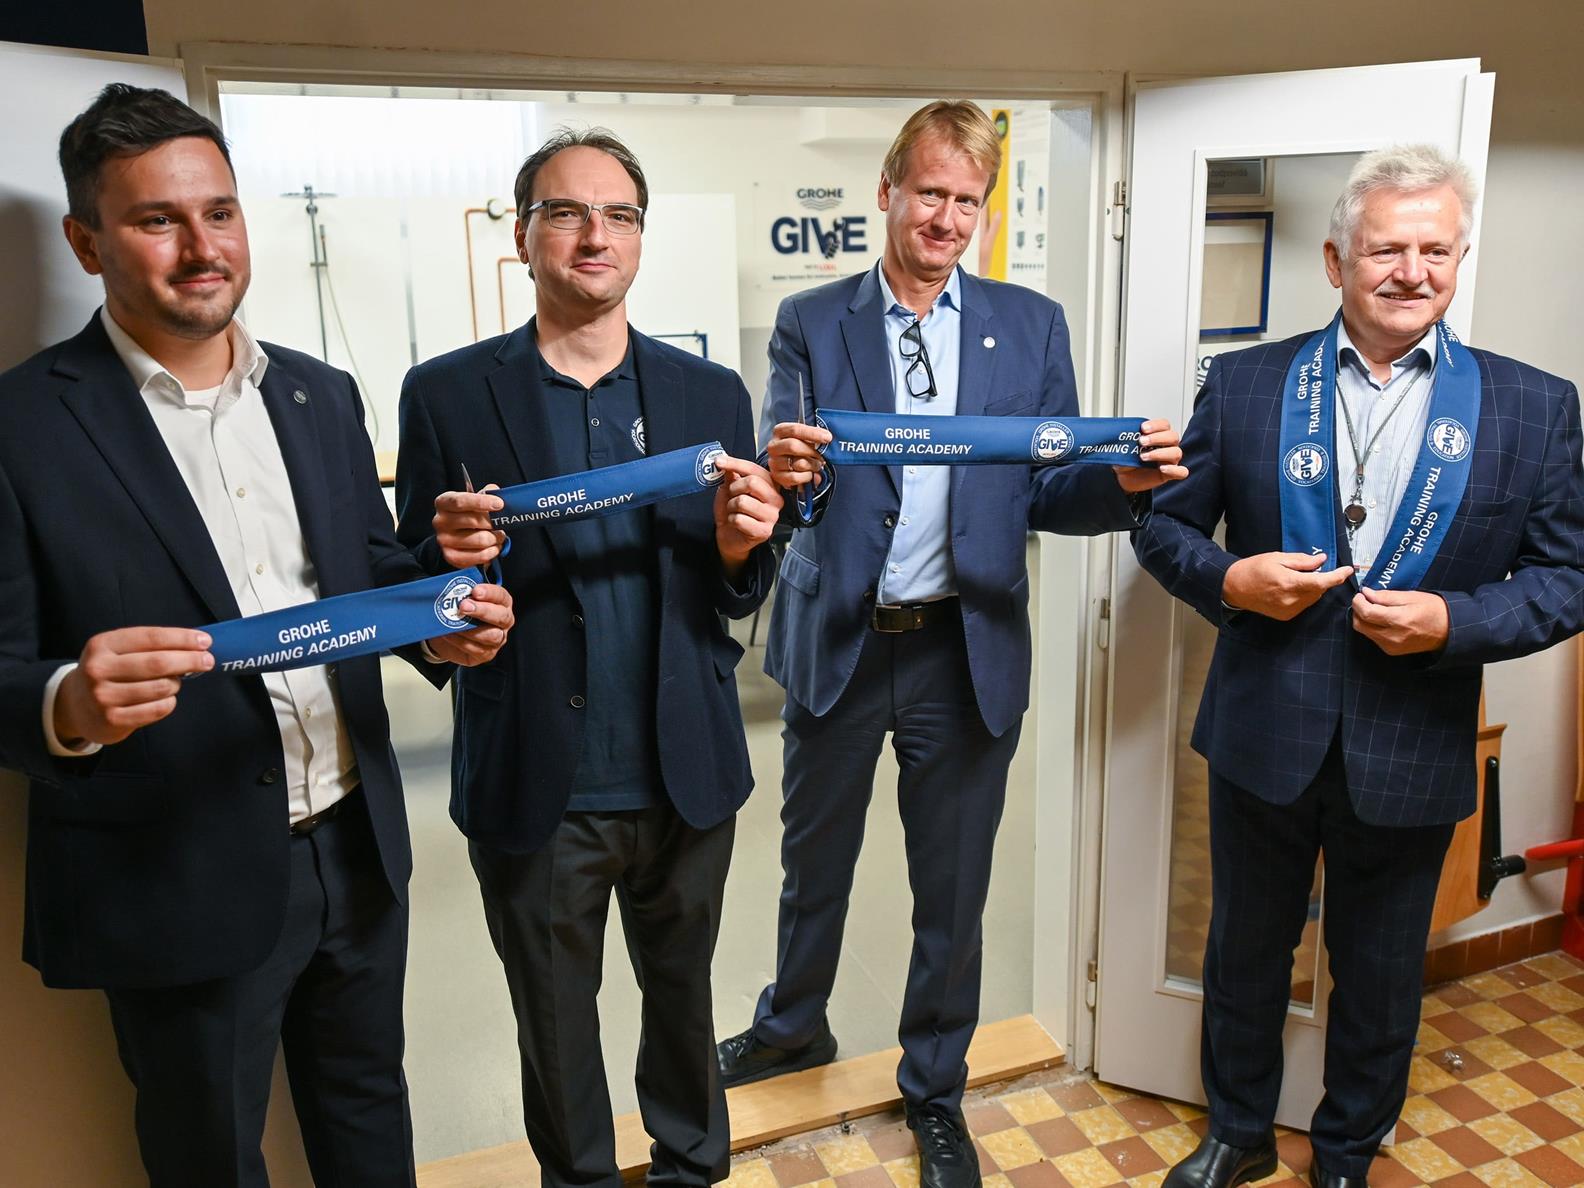 GROHE-GIVE_CZ_01-1